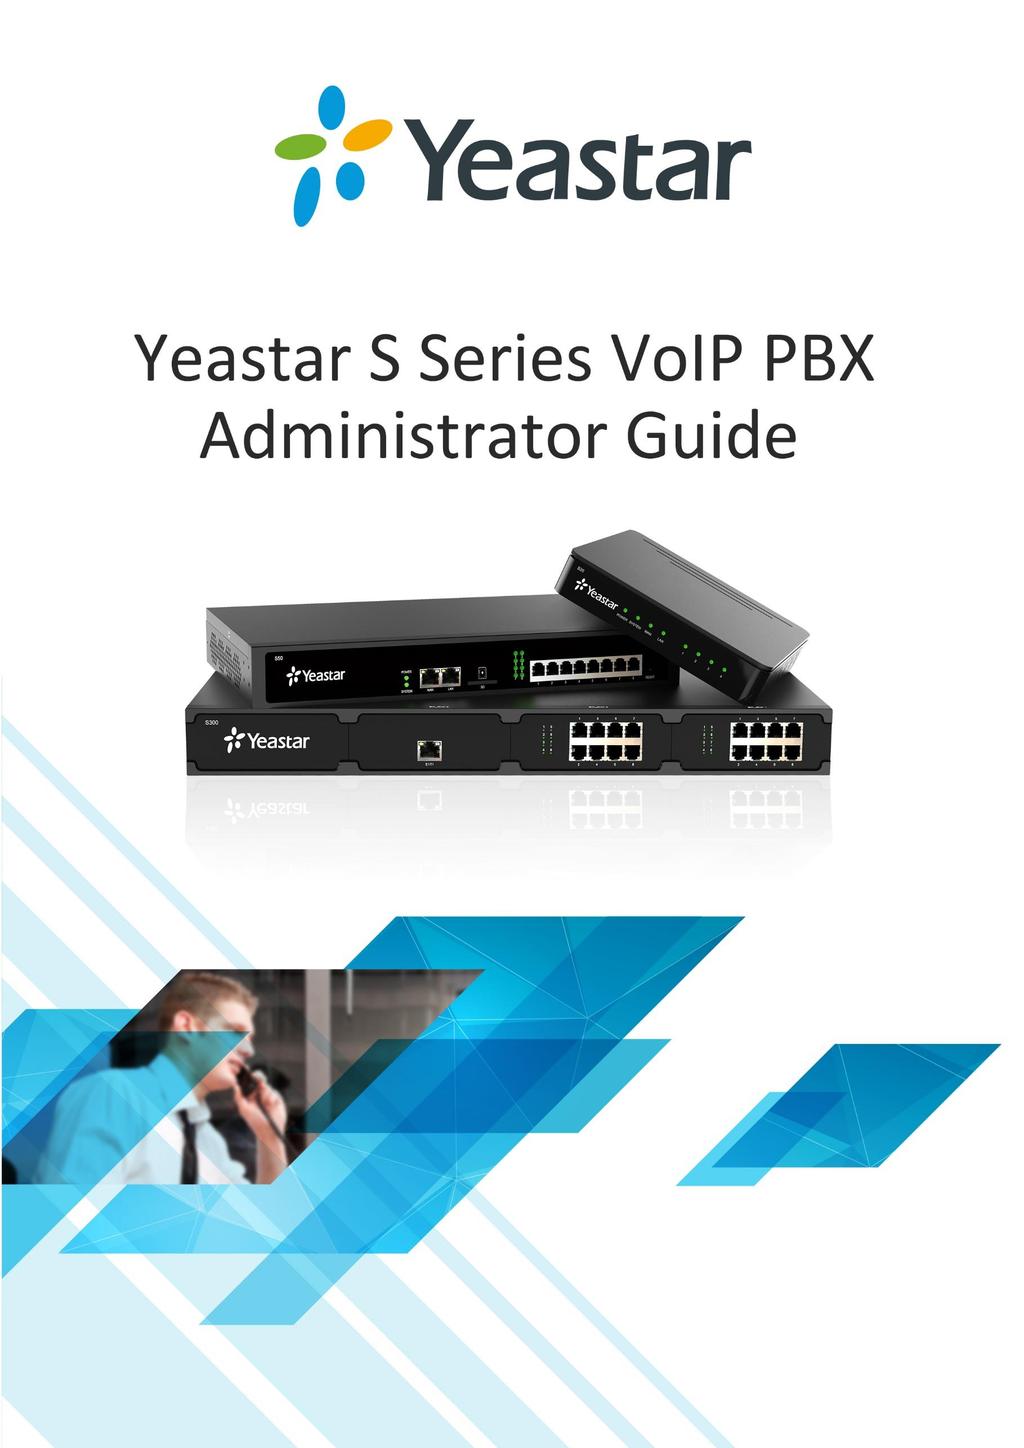 K2 VoIP PBX Administrator Guide Sales Tel: +86-592-5503309 E-mail: sales@yeastar.